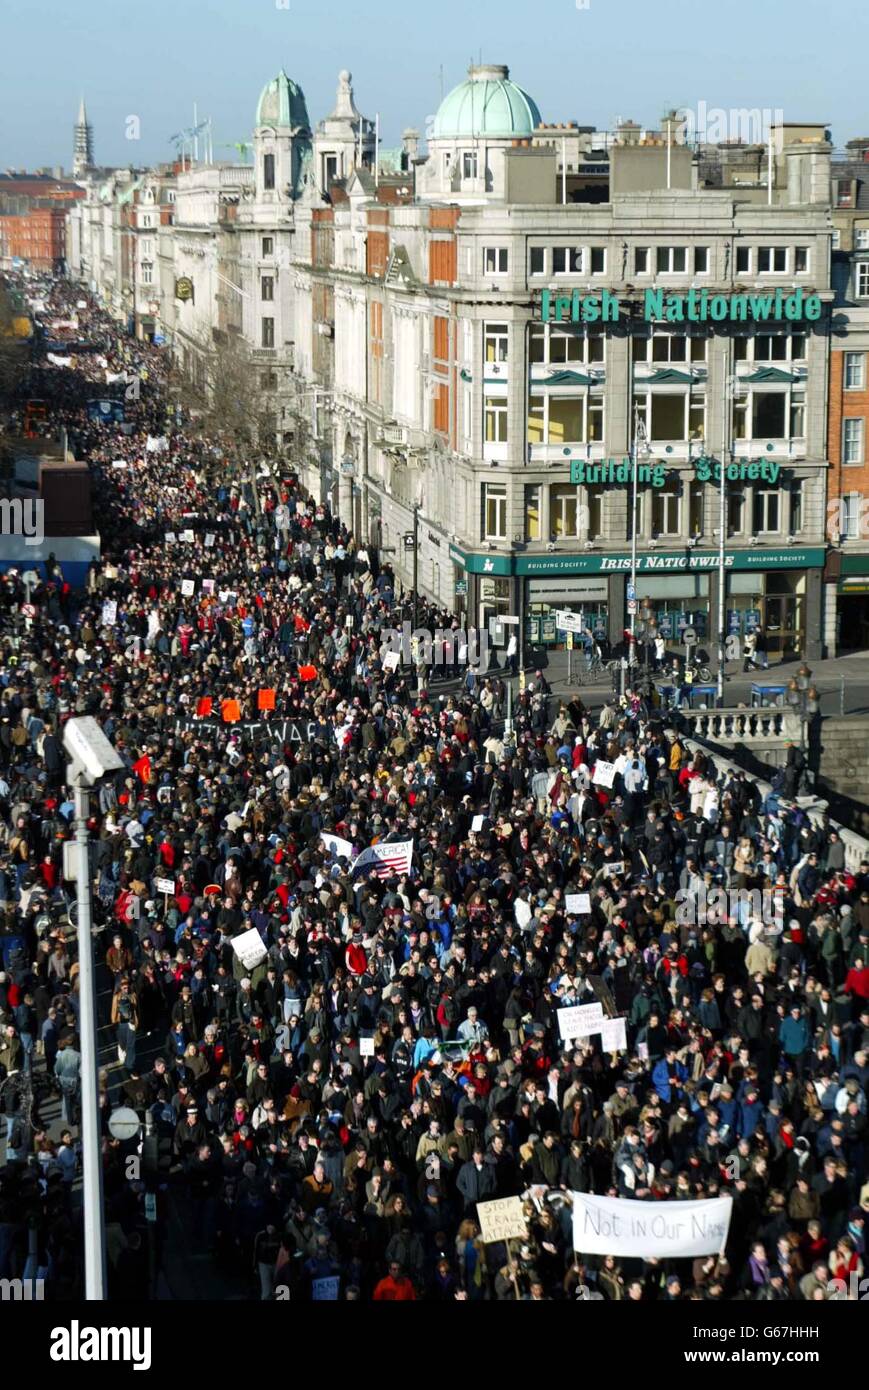 Anti-war protesters crossing O'Connell Bridge, Dublin, Republic of Ireland, during an anti-war demonstration, which brought over 20,000 people on to the streets. PA photo. Stock Photo